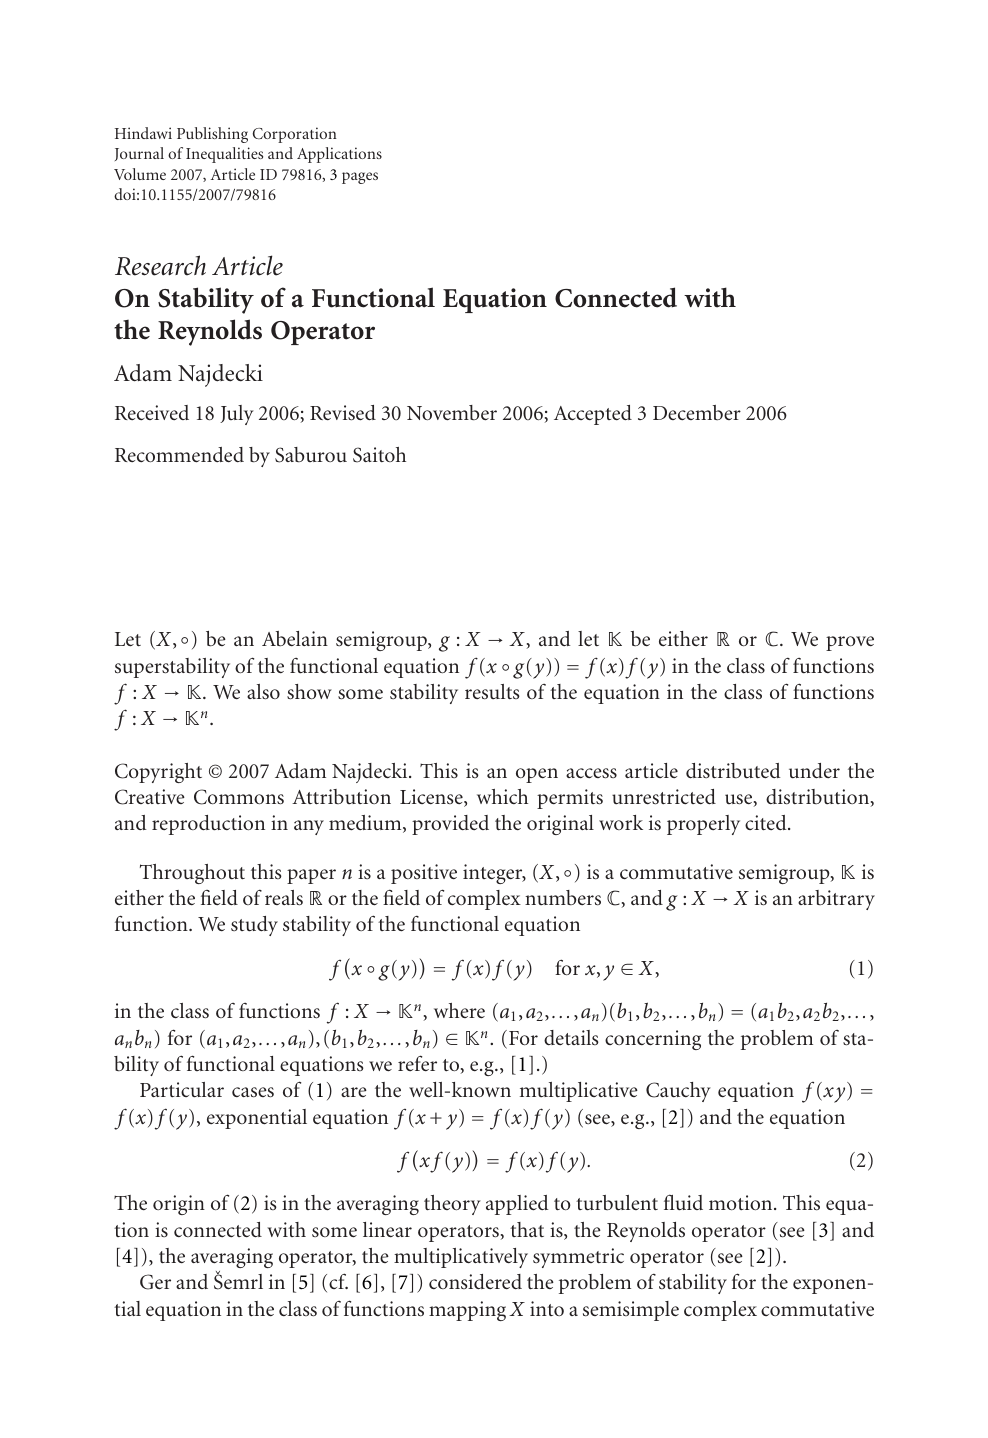 On Stability Of A Functional Equation Connected With The Reynolds Operator Topic Of Research Paper In Mathematics Download Scholarly Article Pdf And Read For Free On Cyberleninka Open Science Hub